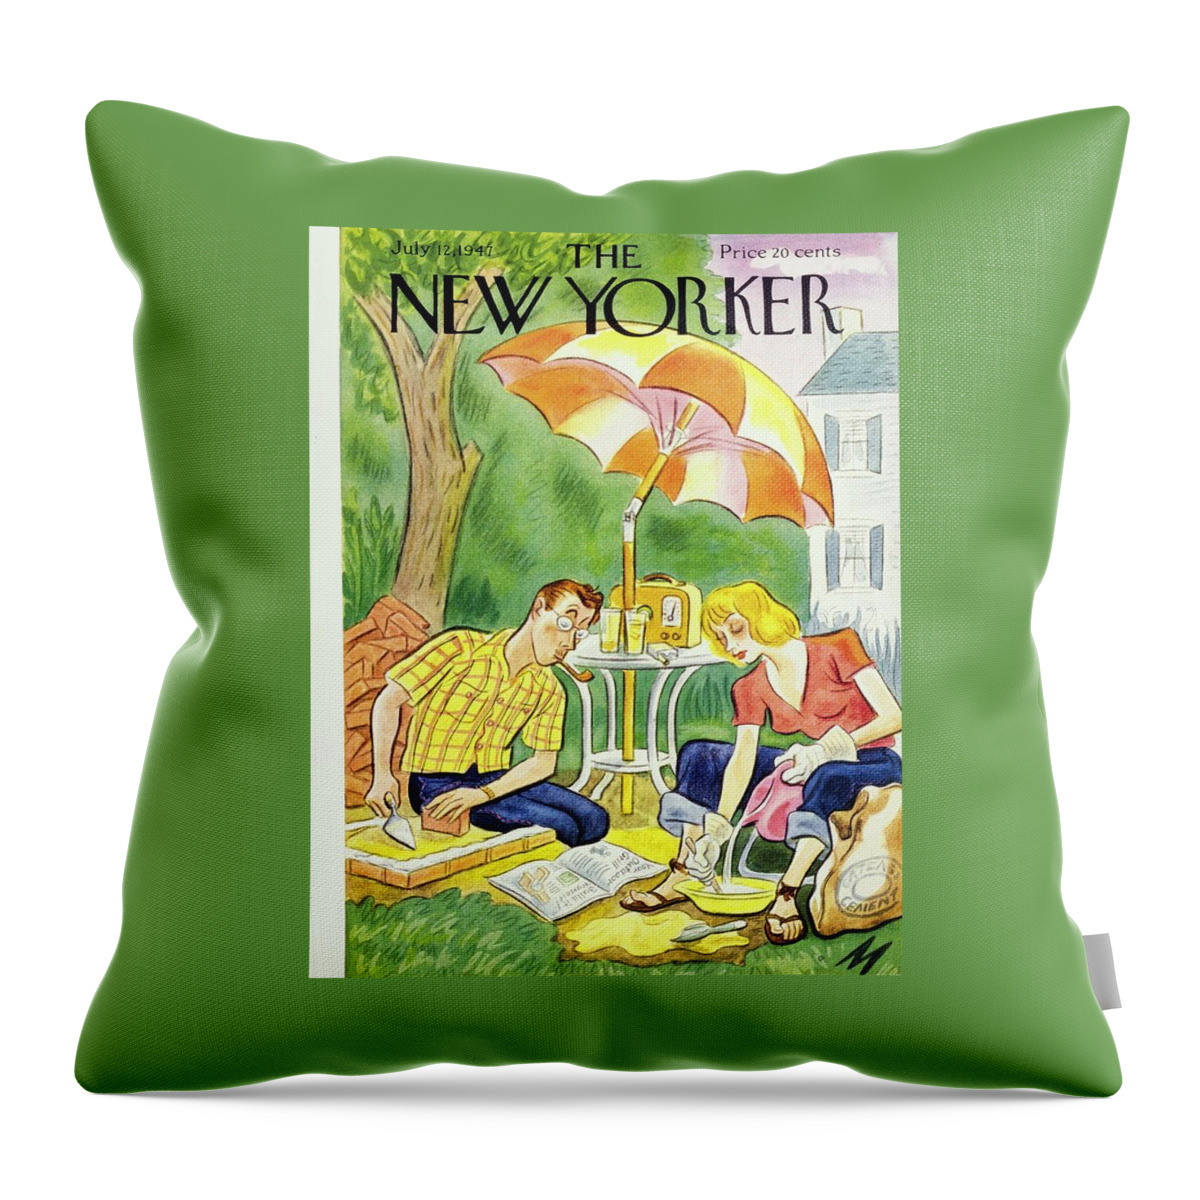 New Yorker July 12th 1947 Throw Pillow